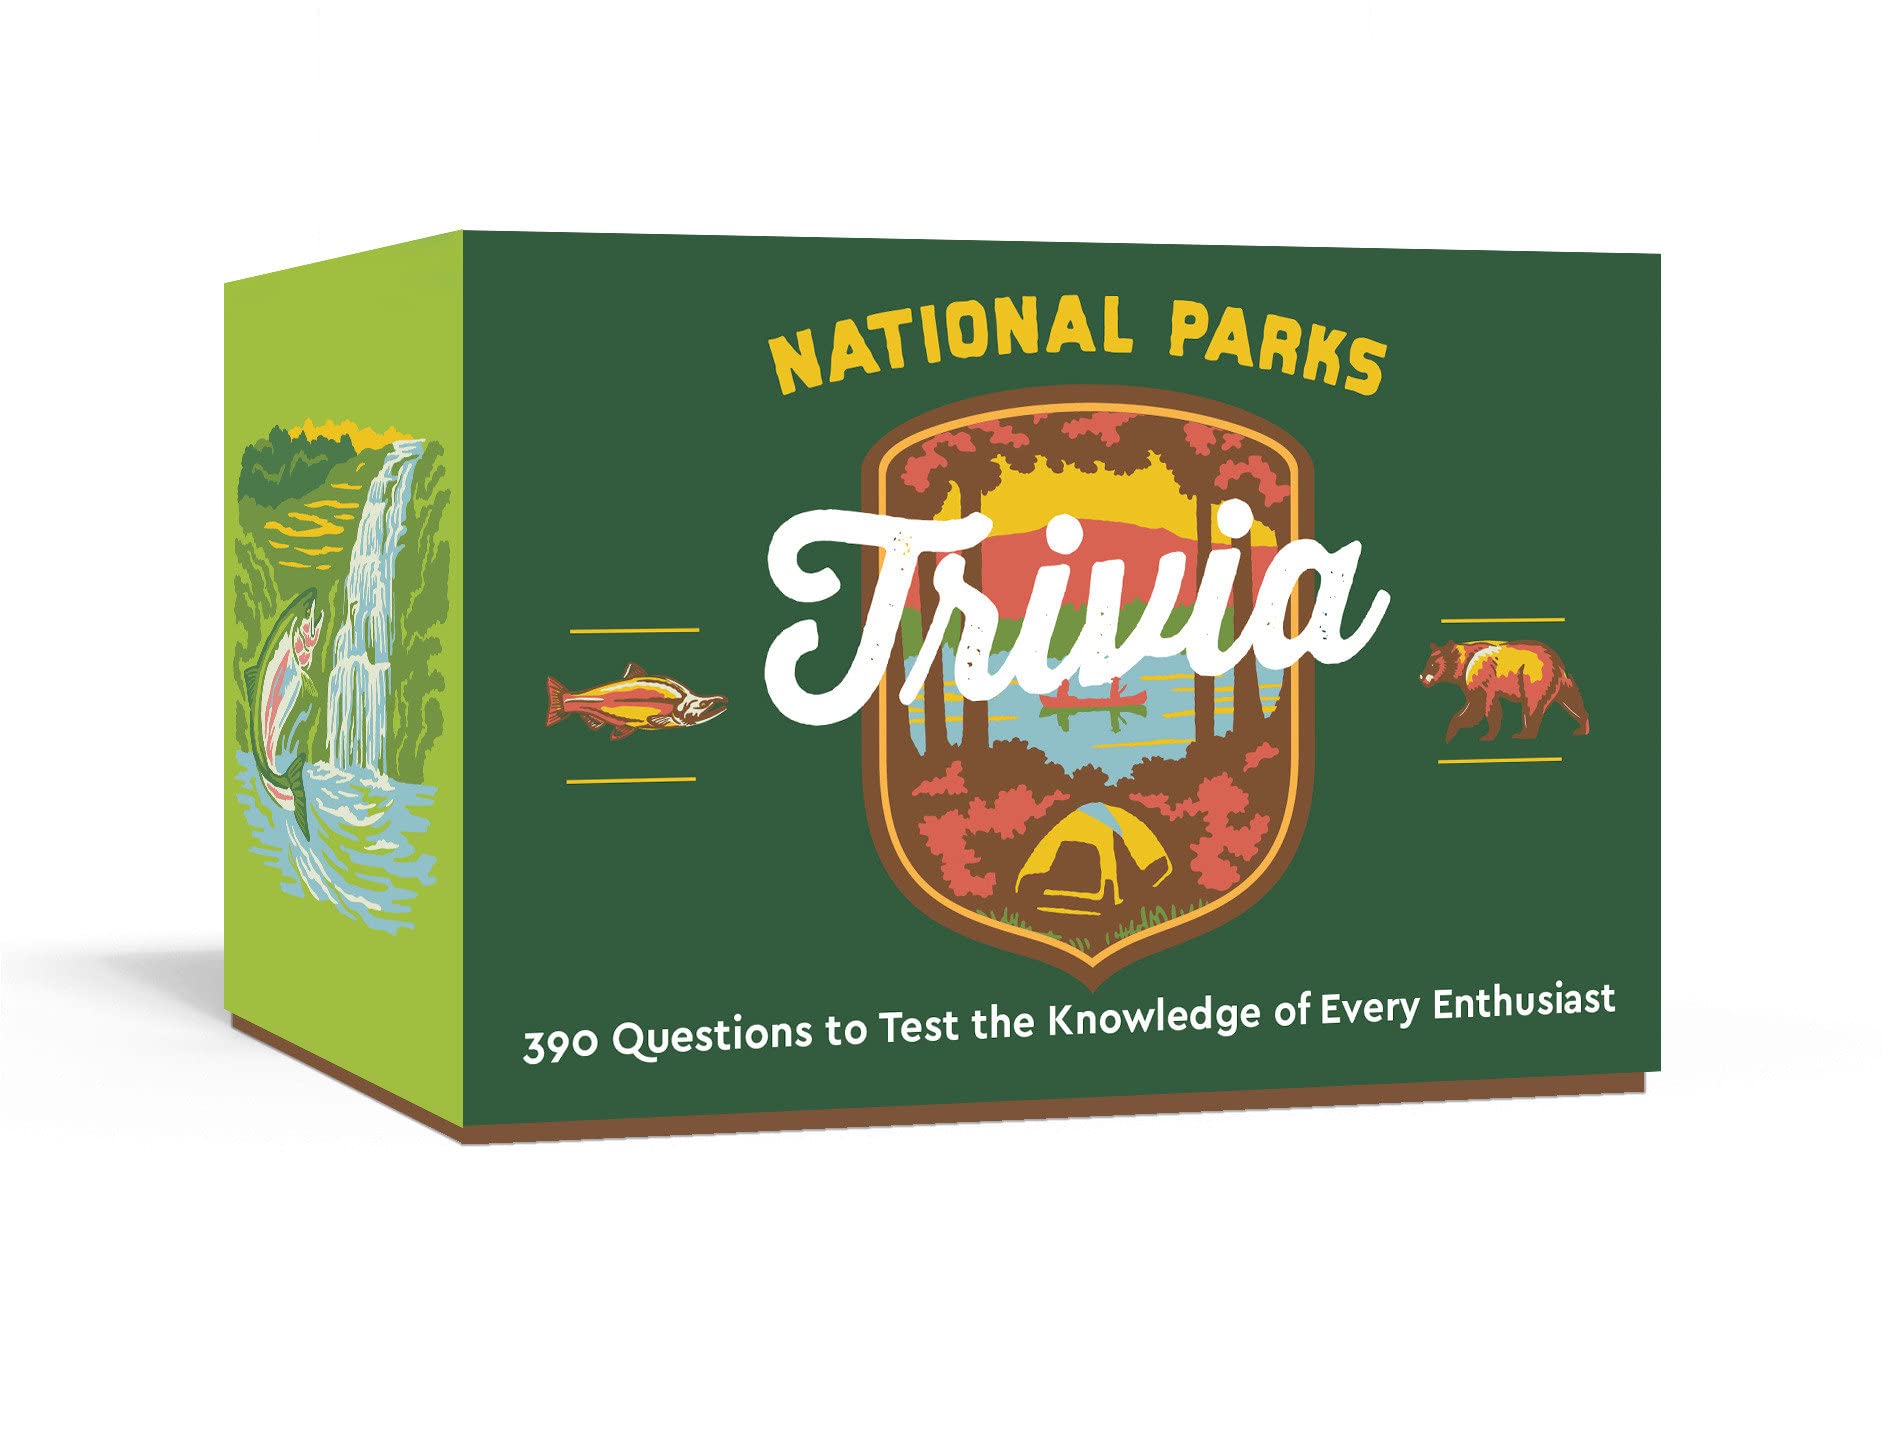 View National Parks Trivia: A Card Game by Emily Hoff and Maygen Keller